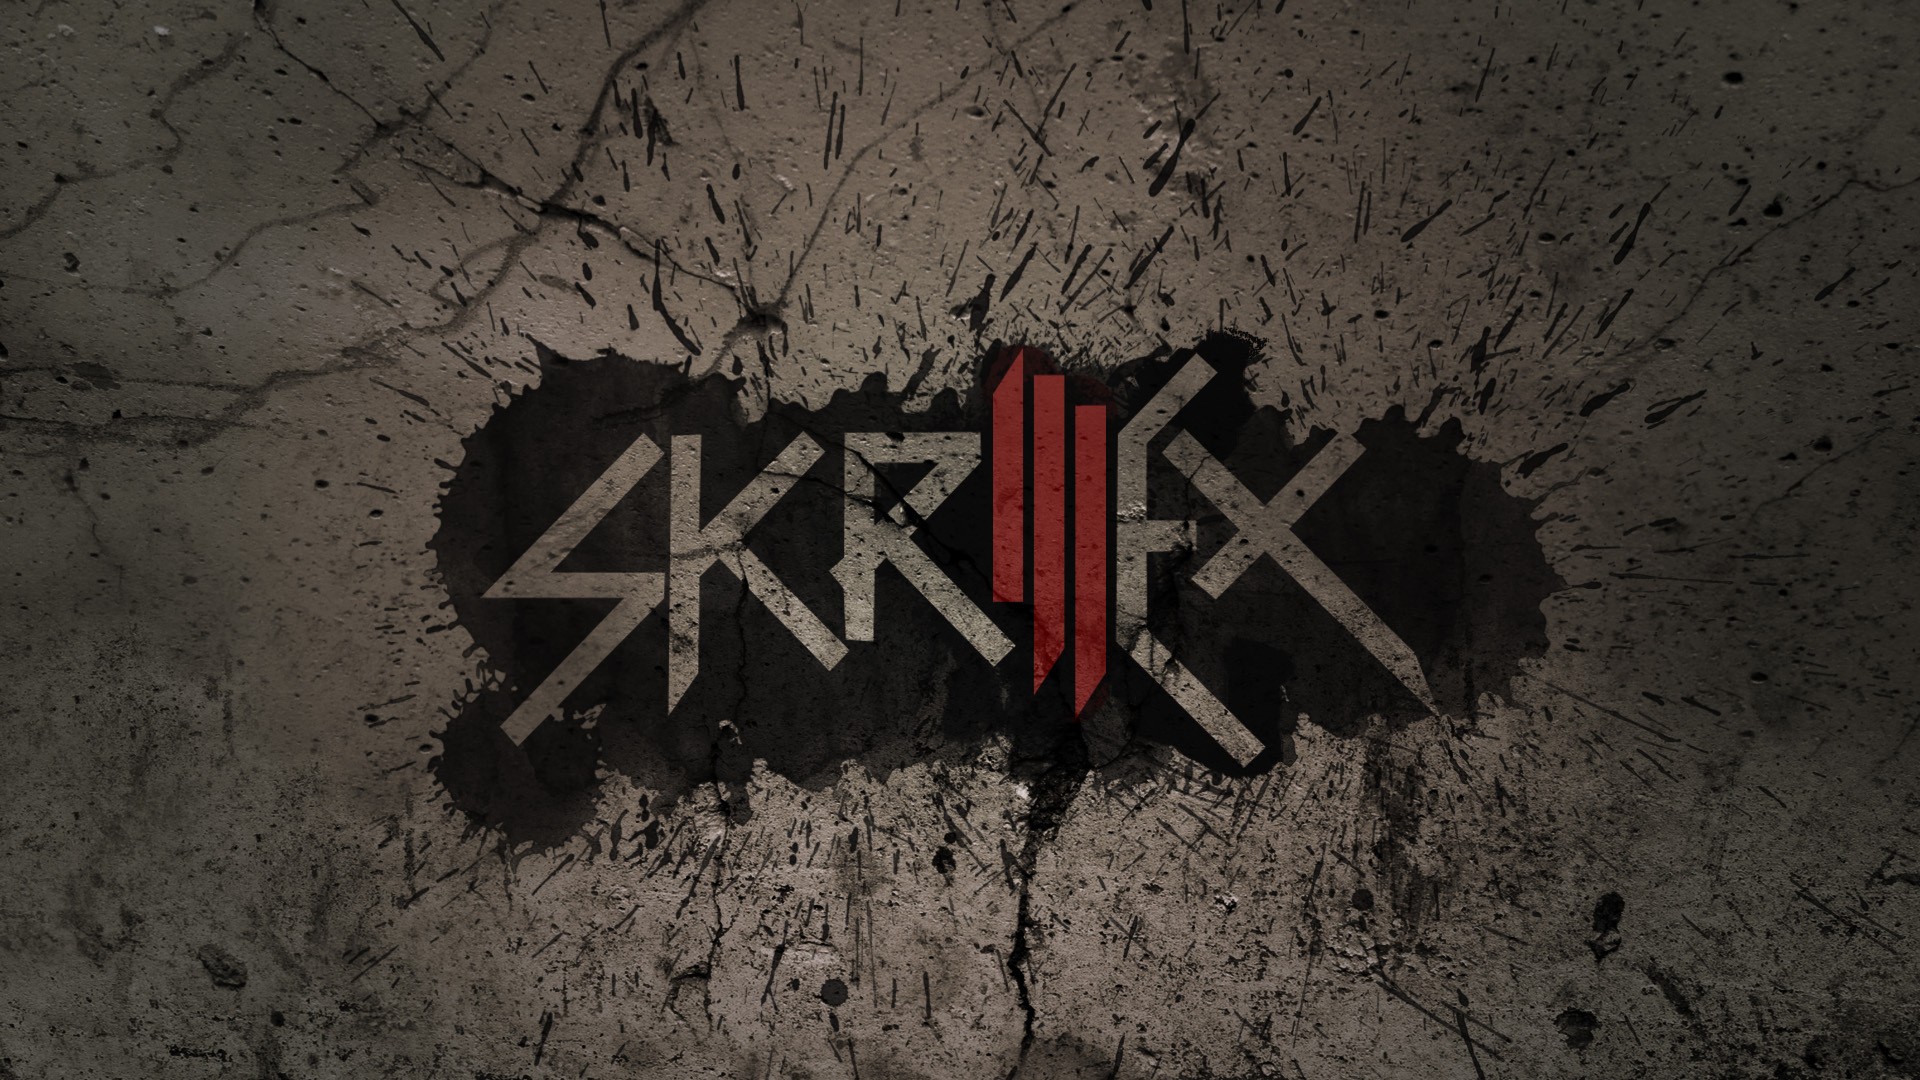 Skrillex Wallpaper Pc Android iPhone And iPad